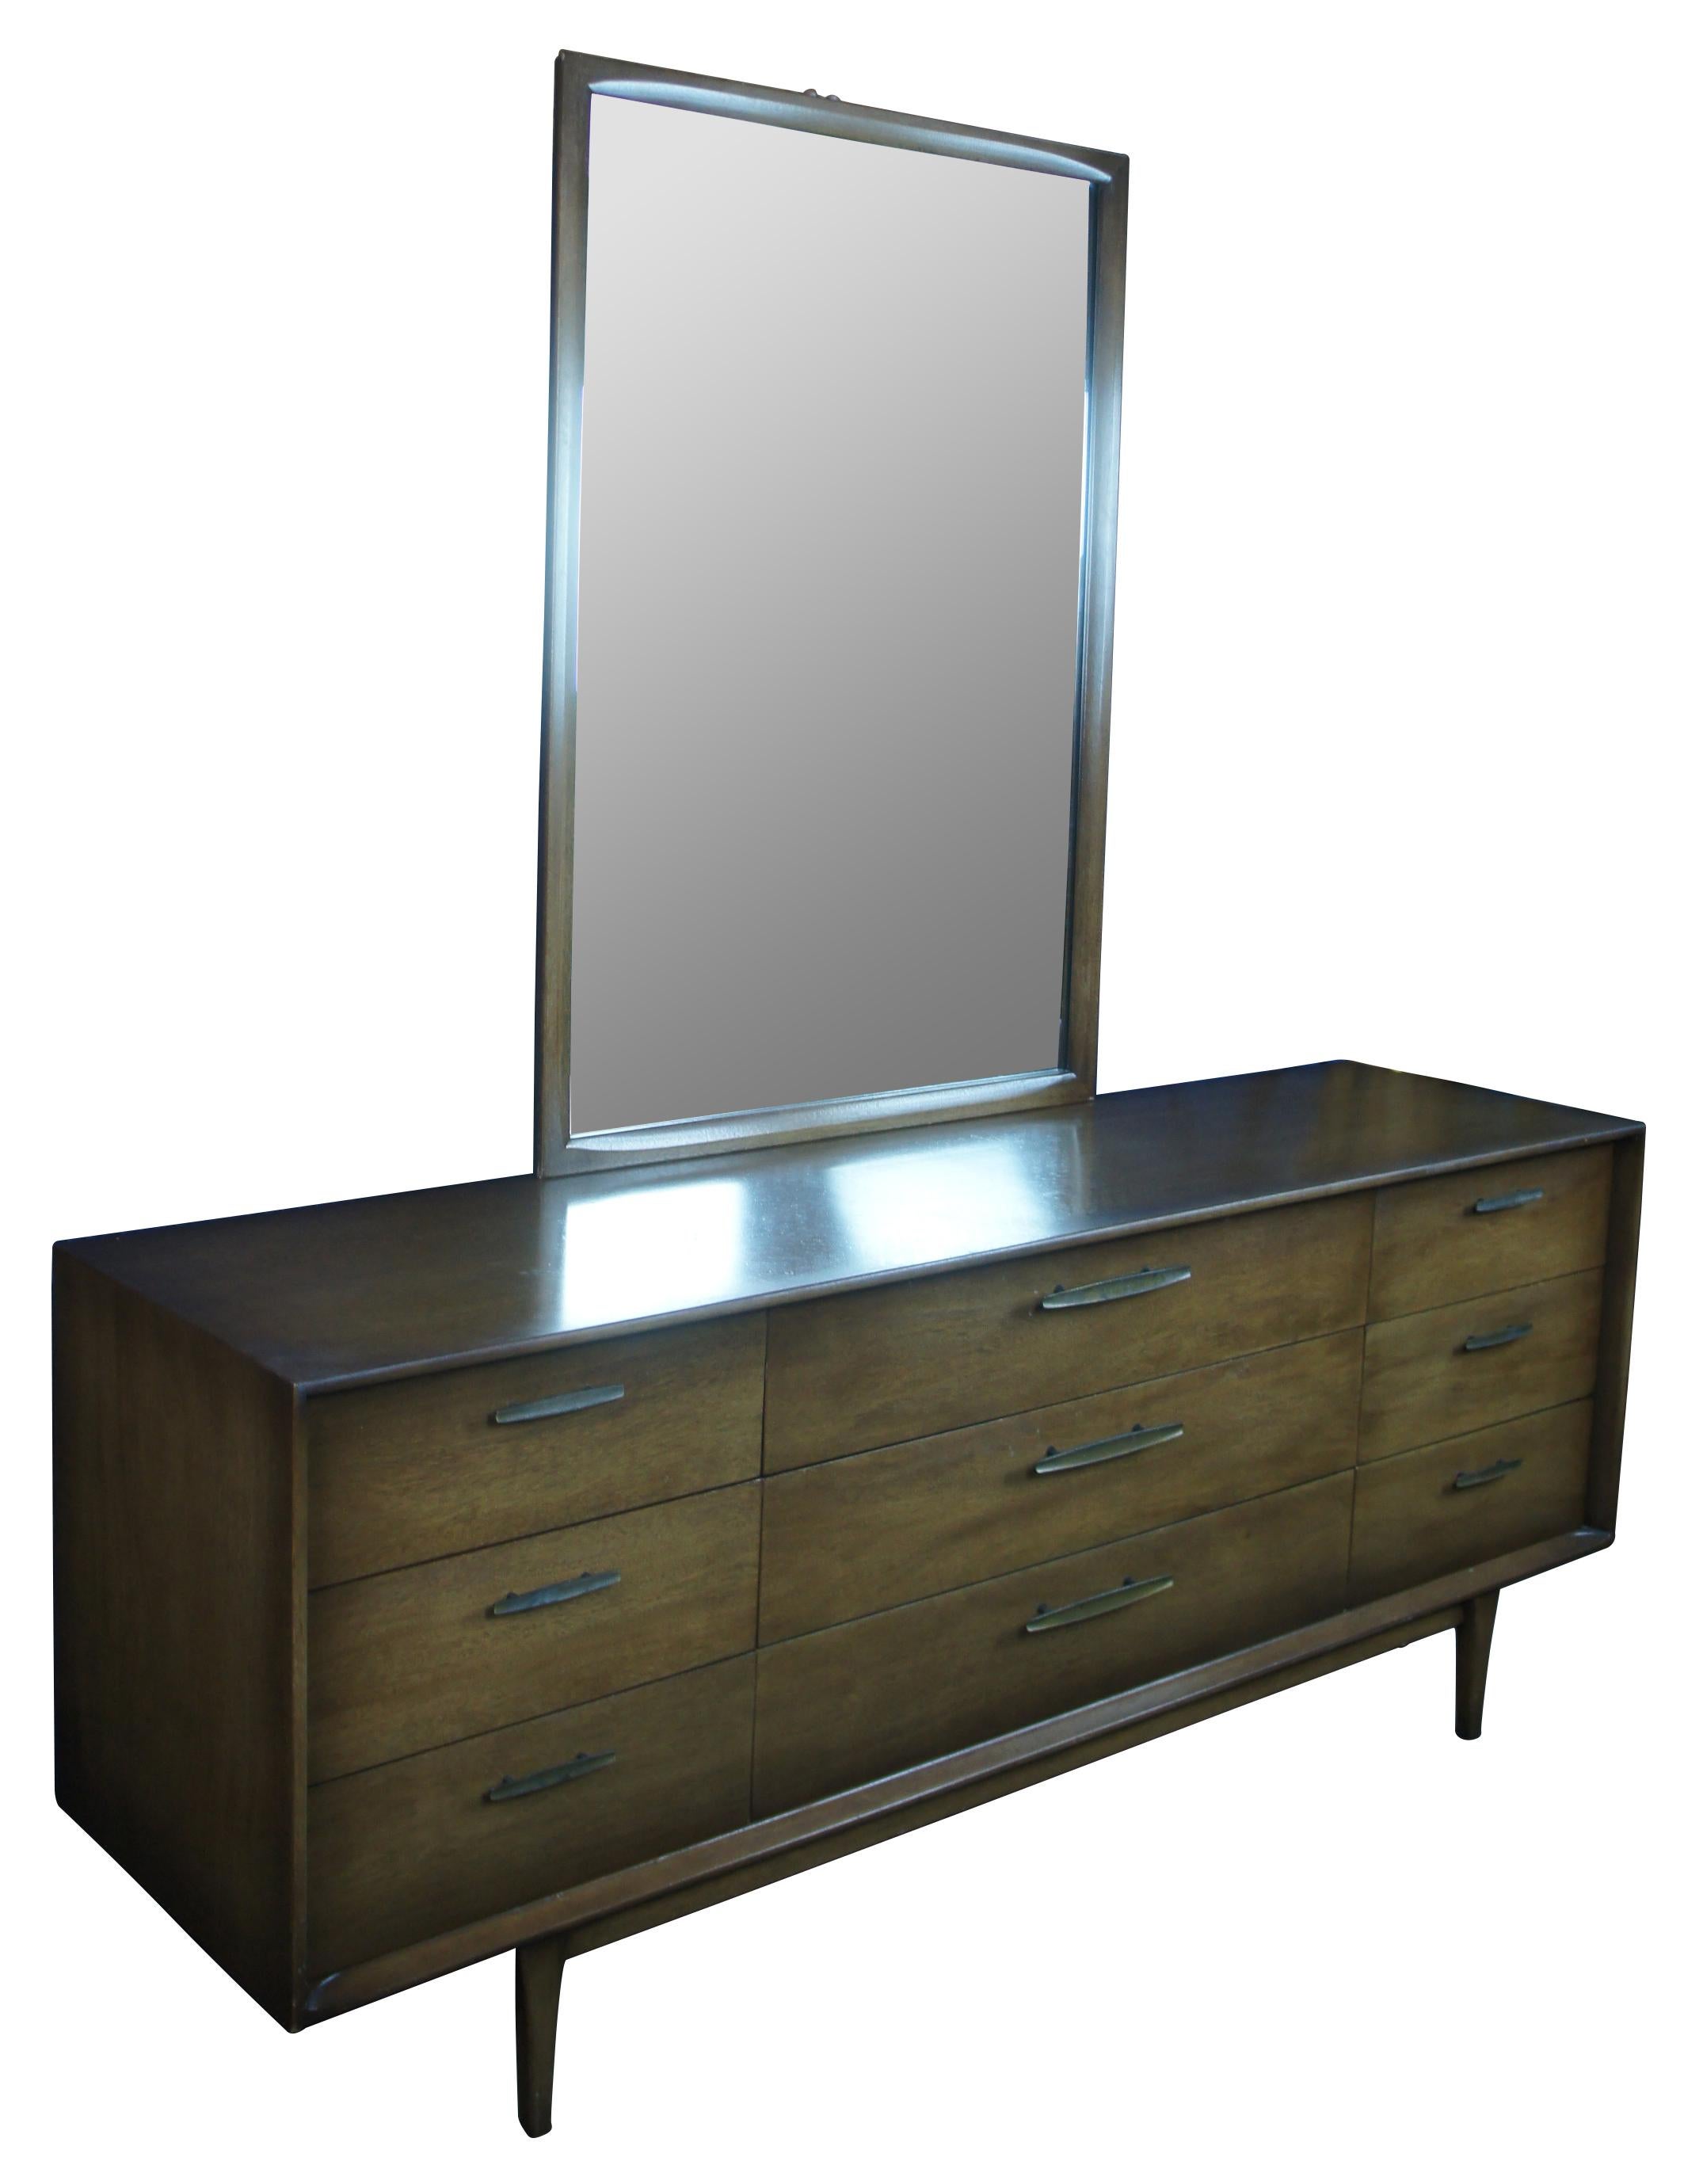 Mid-Century Modern mirrored dresser. Made of walnut featuring rectangular form with nine drawers supported by tapered legs.

Measures: dresser 31